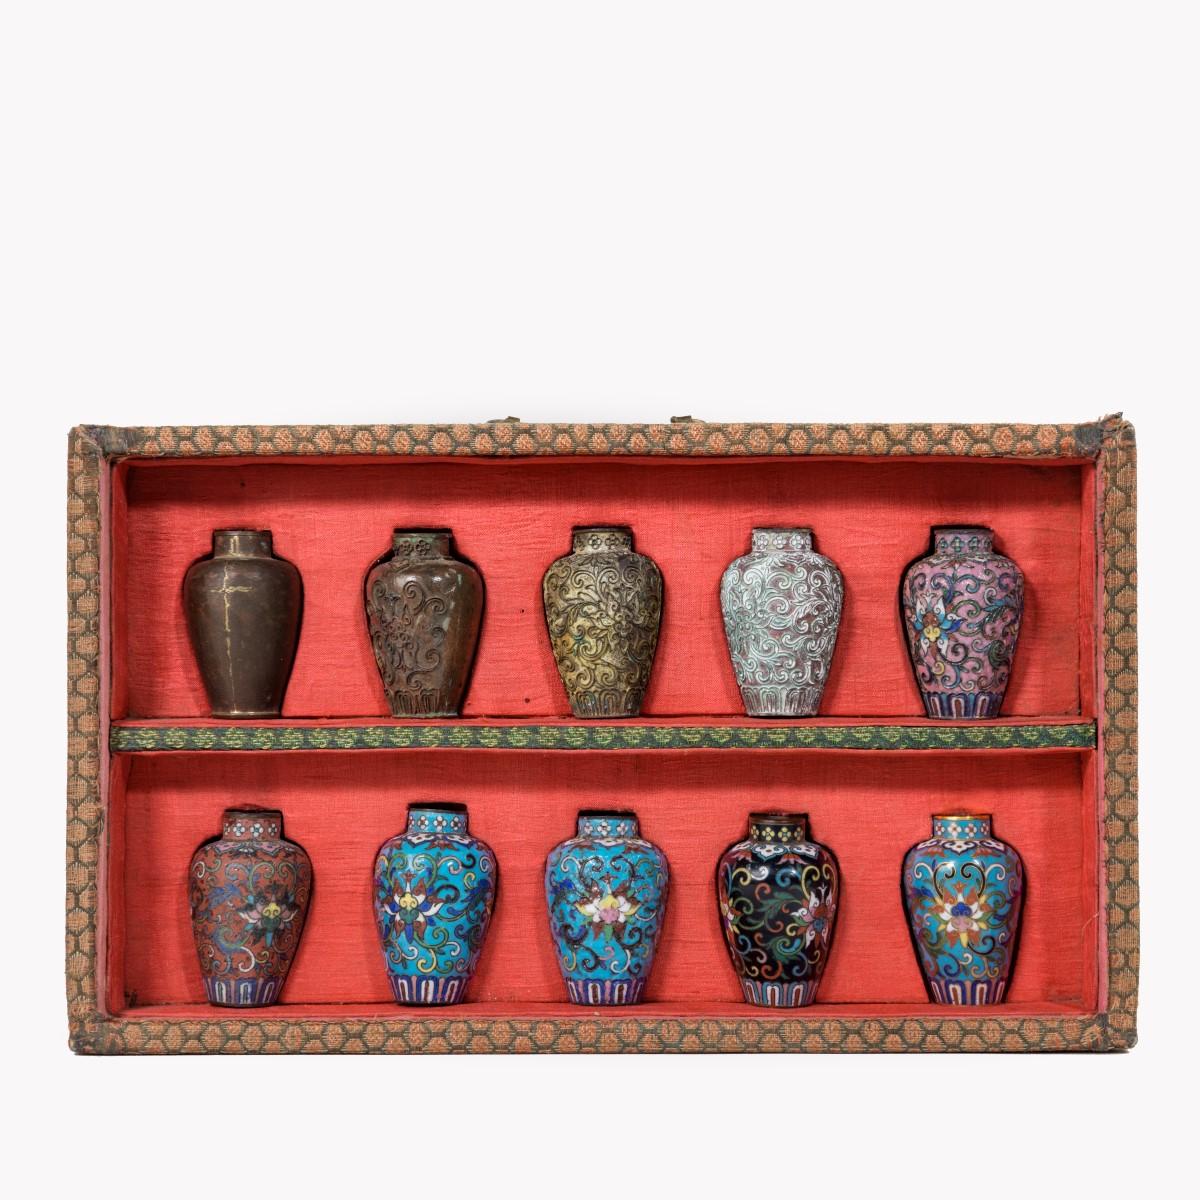 A Japanese cloisonné sample set, comprising 10 small metal vases showing the various stages of cloisonné production, all in a silk brocade covered box with a red silk lining. Meiji period, circa 1900.
Measures: Box 11 1/4 in. 6 3/4in
Single vase